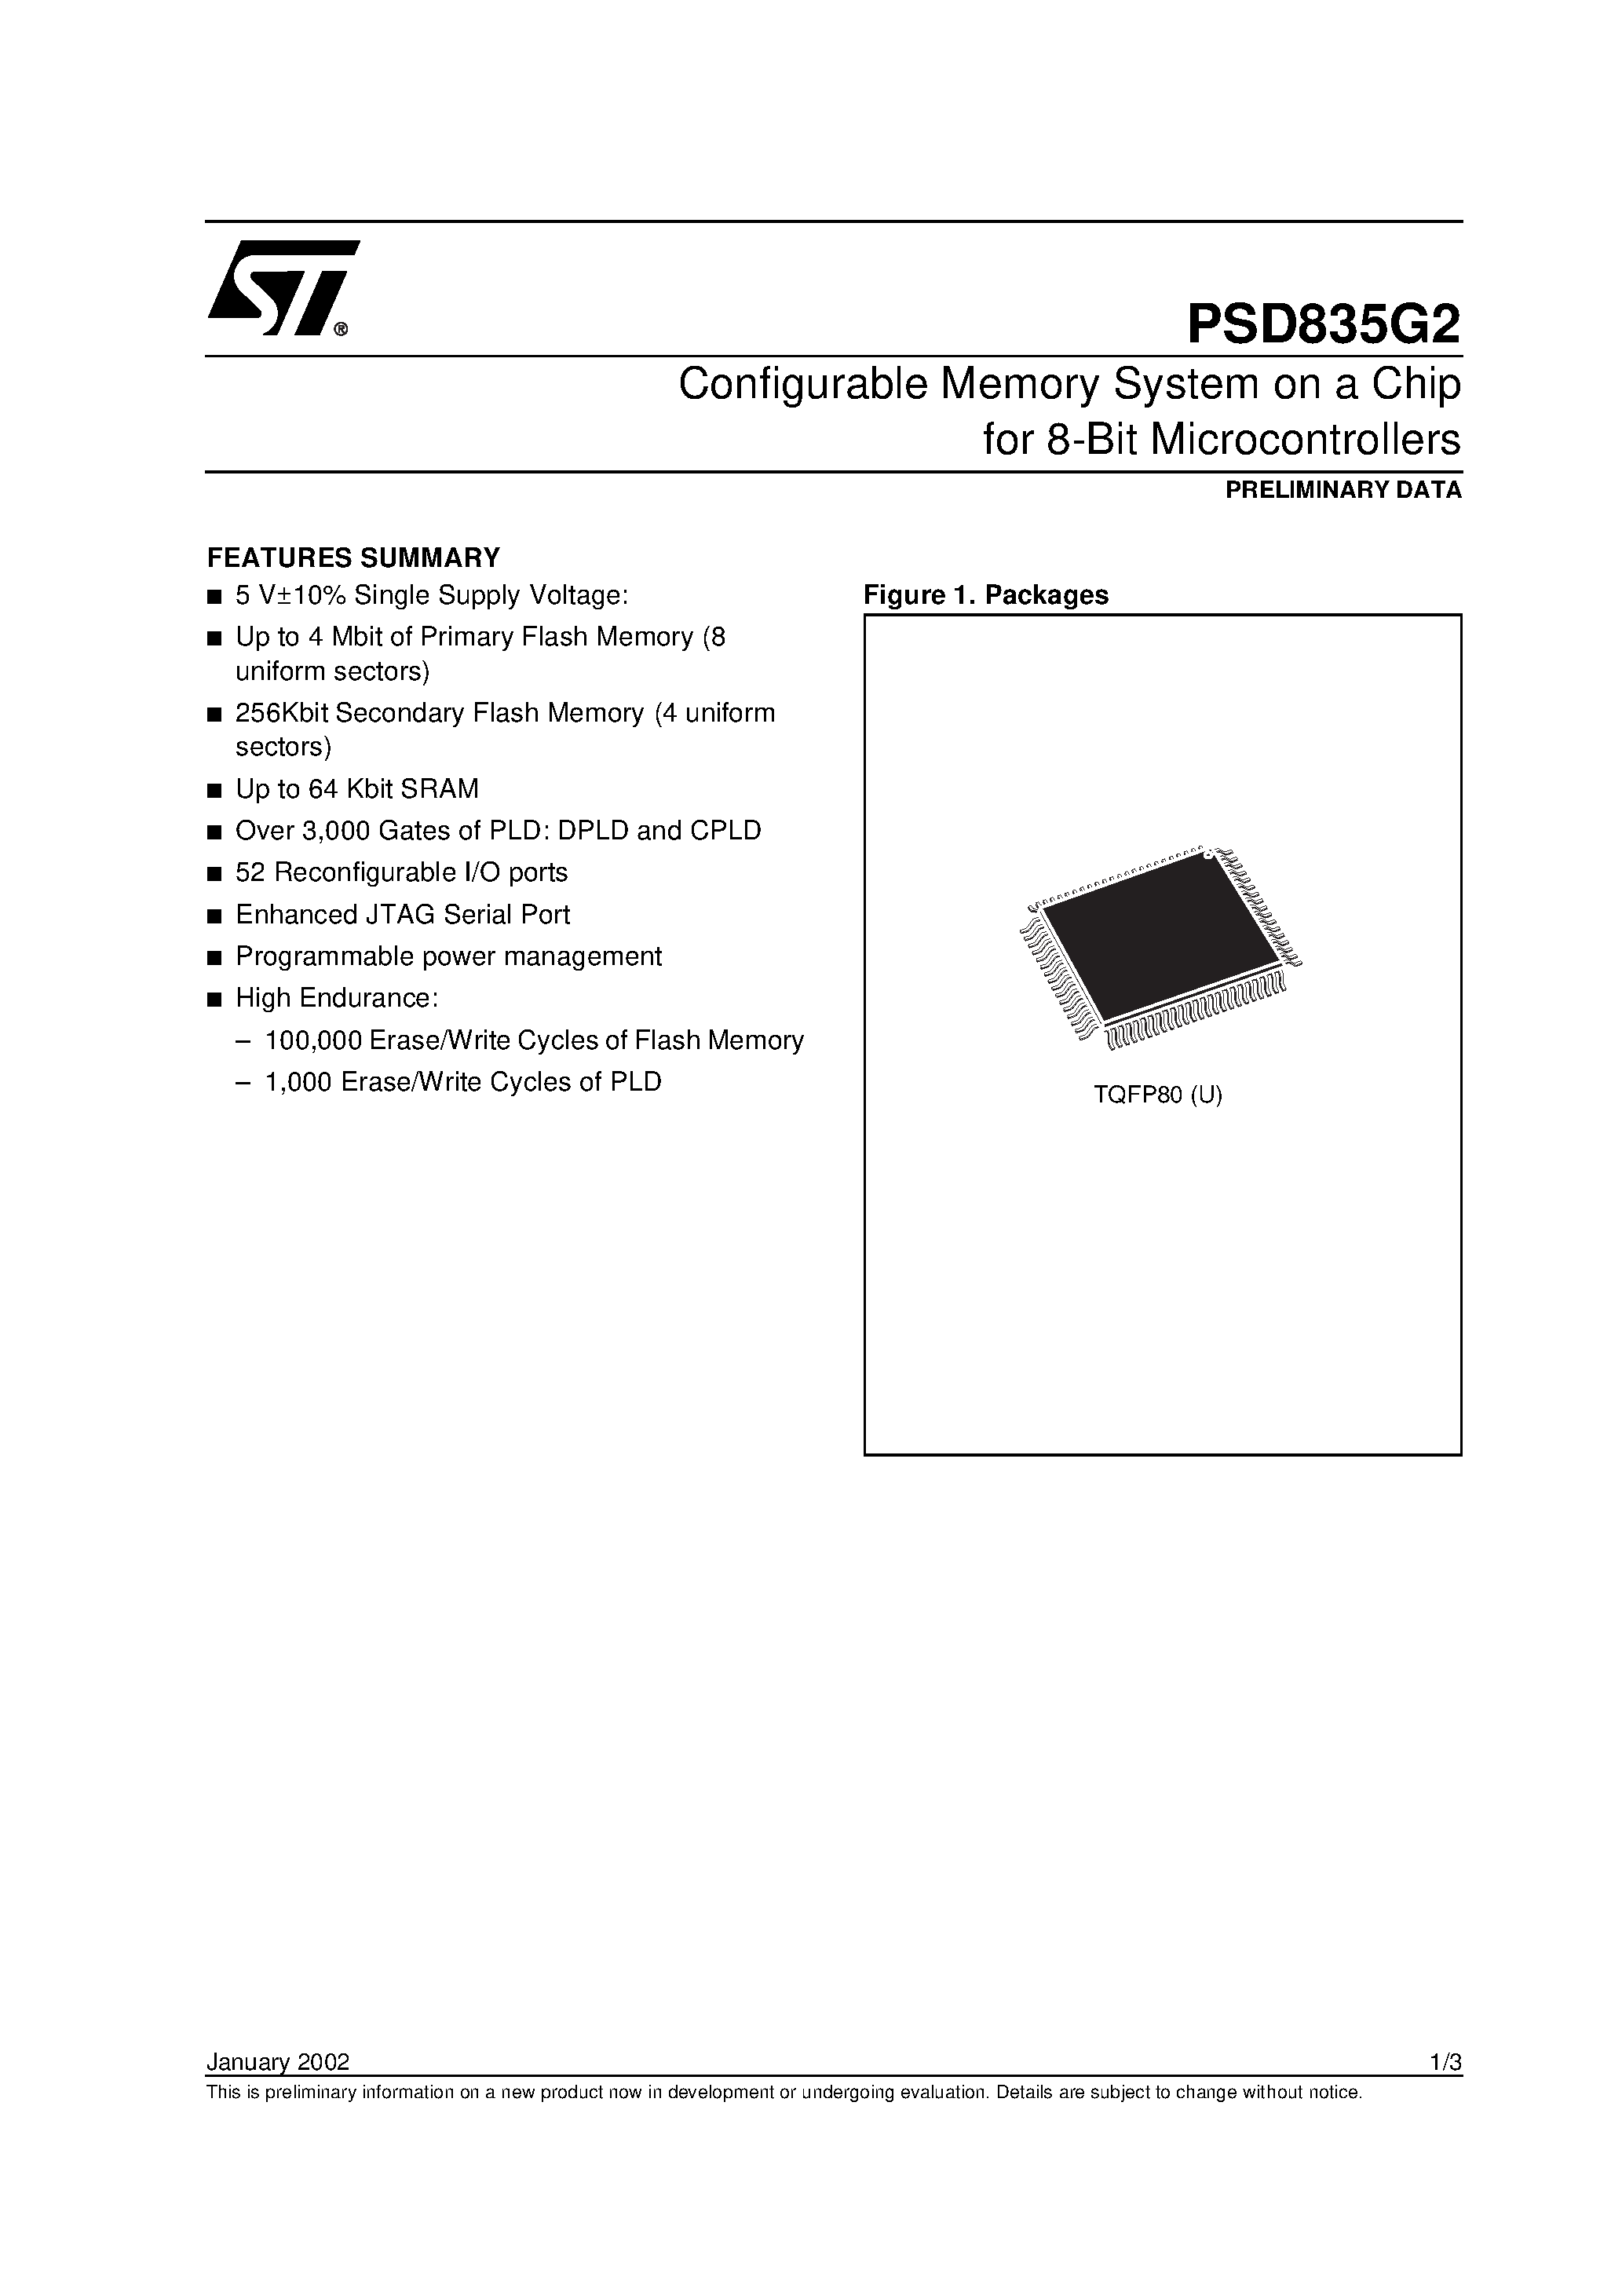 Datasheet PSD835F2-A-12MI - Configurable Memory System on a Chip for 8-Bit Microcontrollers page 1